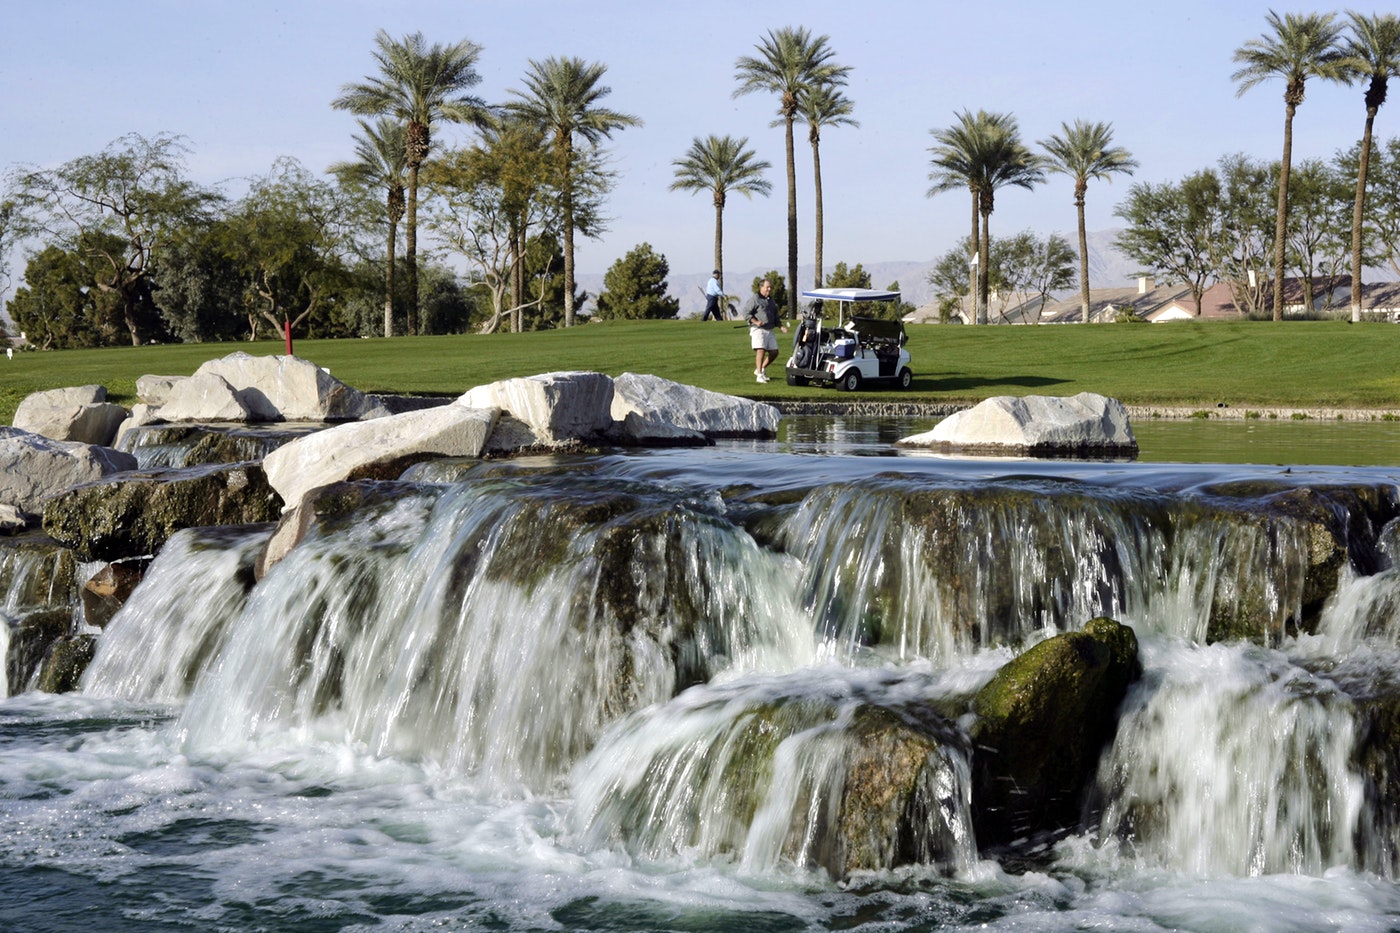 The 36-hole Mountain Vista golf course in Palm Desert features expansive greens and lush water features. A 2007 study by the U.S. Geological Survey showed that the entire Coachella Valley, including Palm Springs, Palm Desert and Indian Wells, had sunk by as much as a foot in some places due to groundwater overdraft. The Agua Caliente tribe now wants a role in managing the region’s groundwater. (Ric Francis, Associated Press)